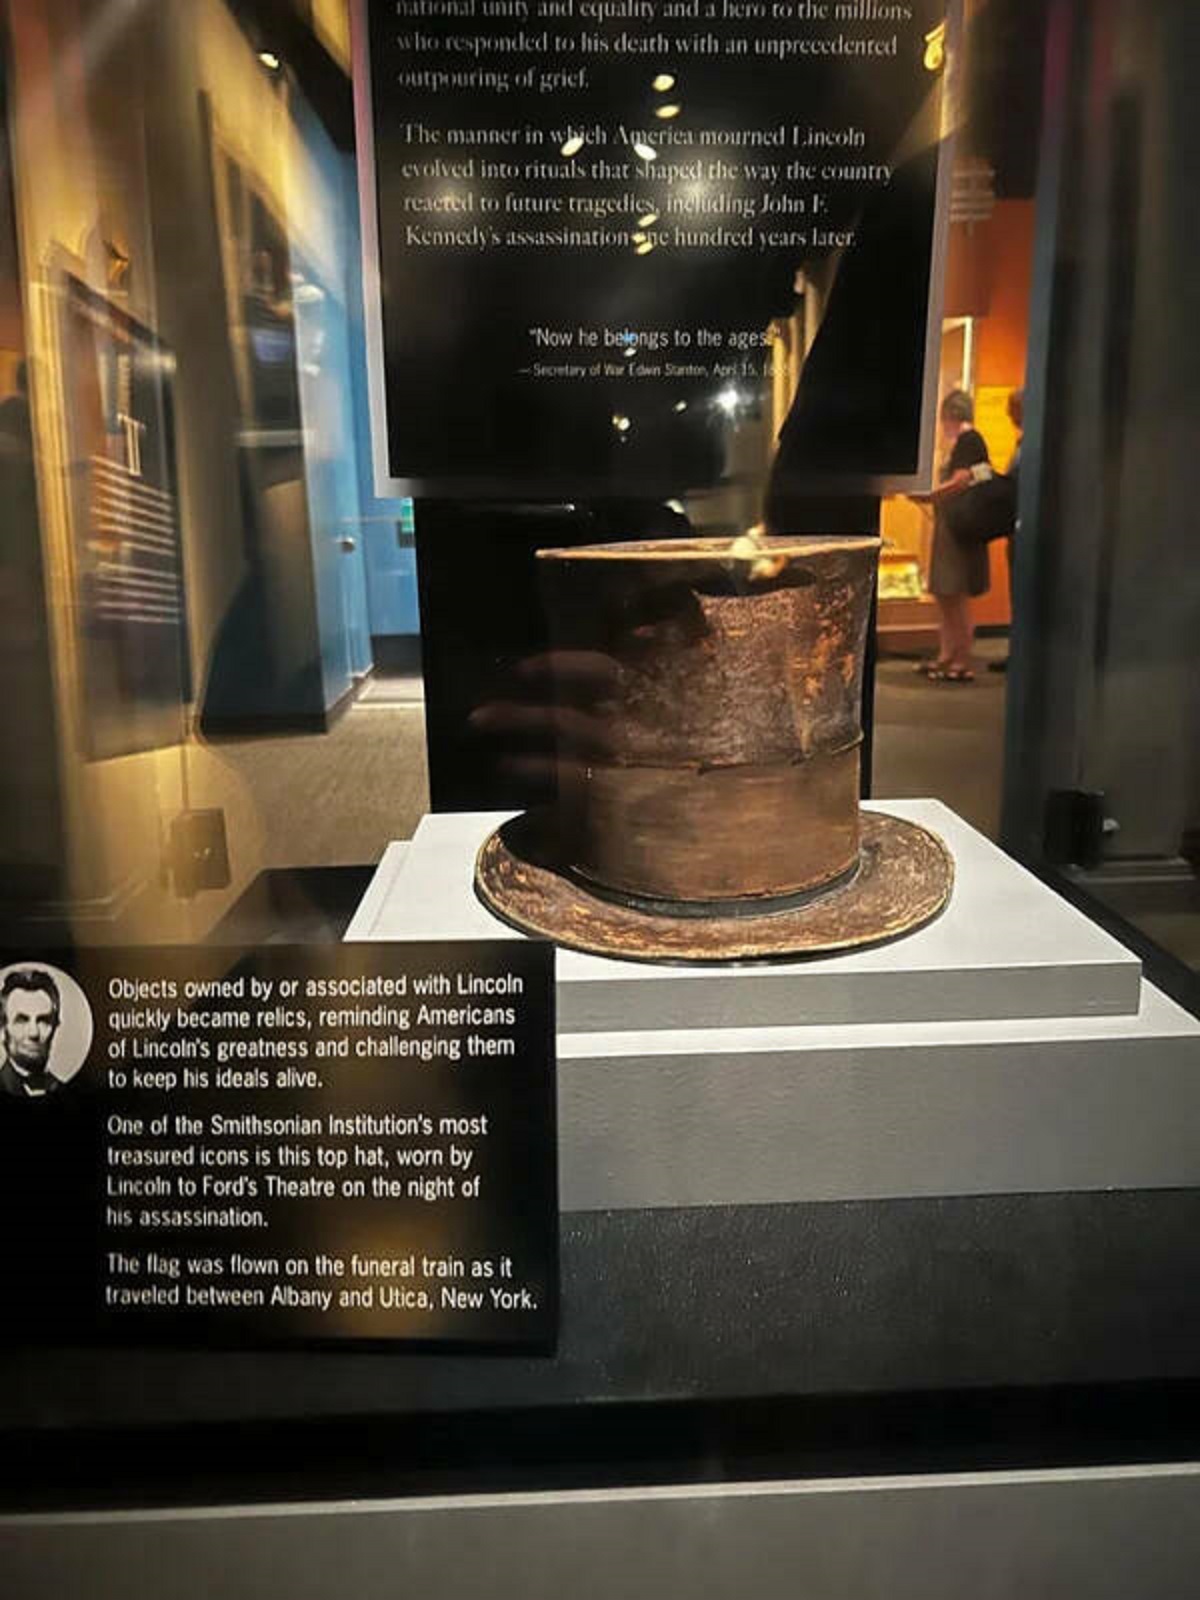 "Abe Lincoln’s hat he wore the night he was assassinated."